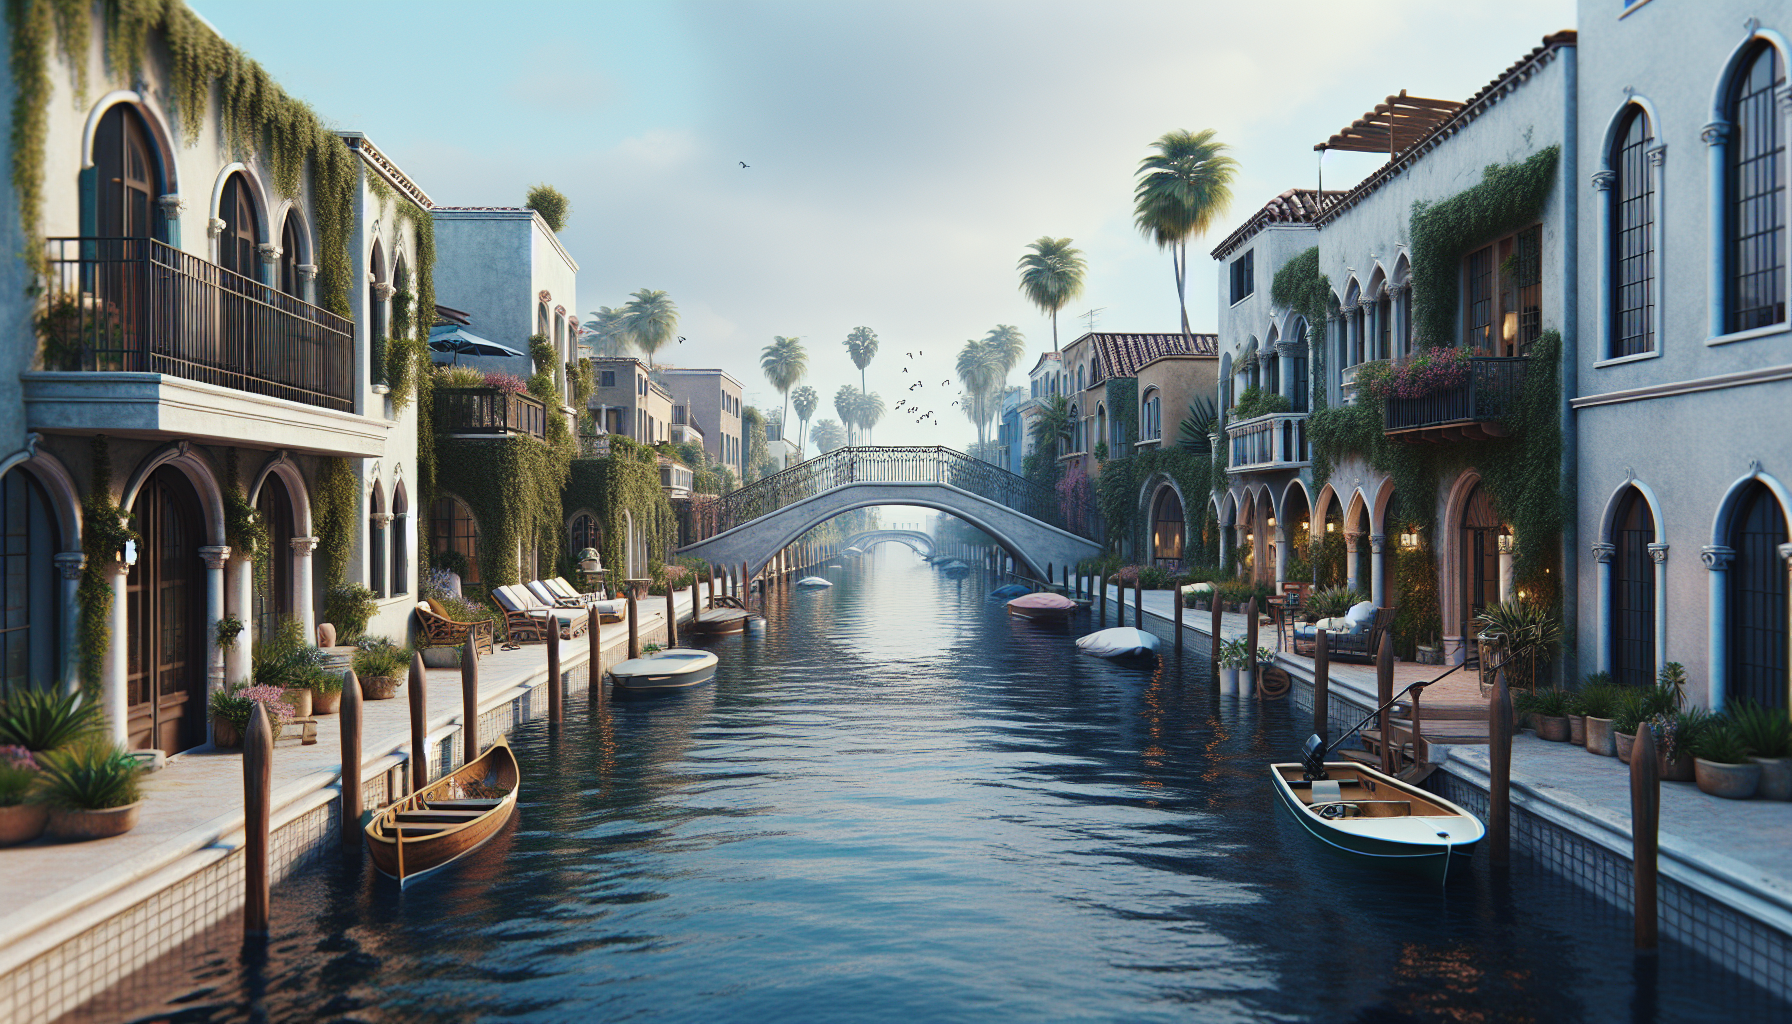 Image of Venice Canals in Los Angeles.